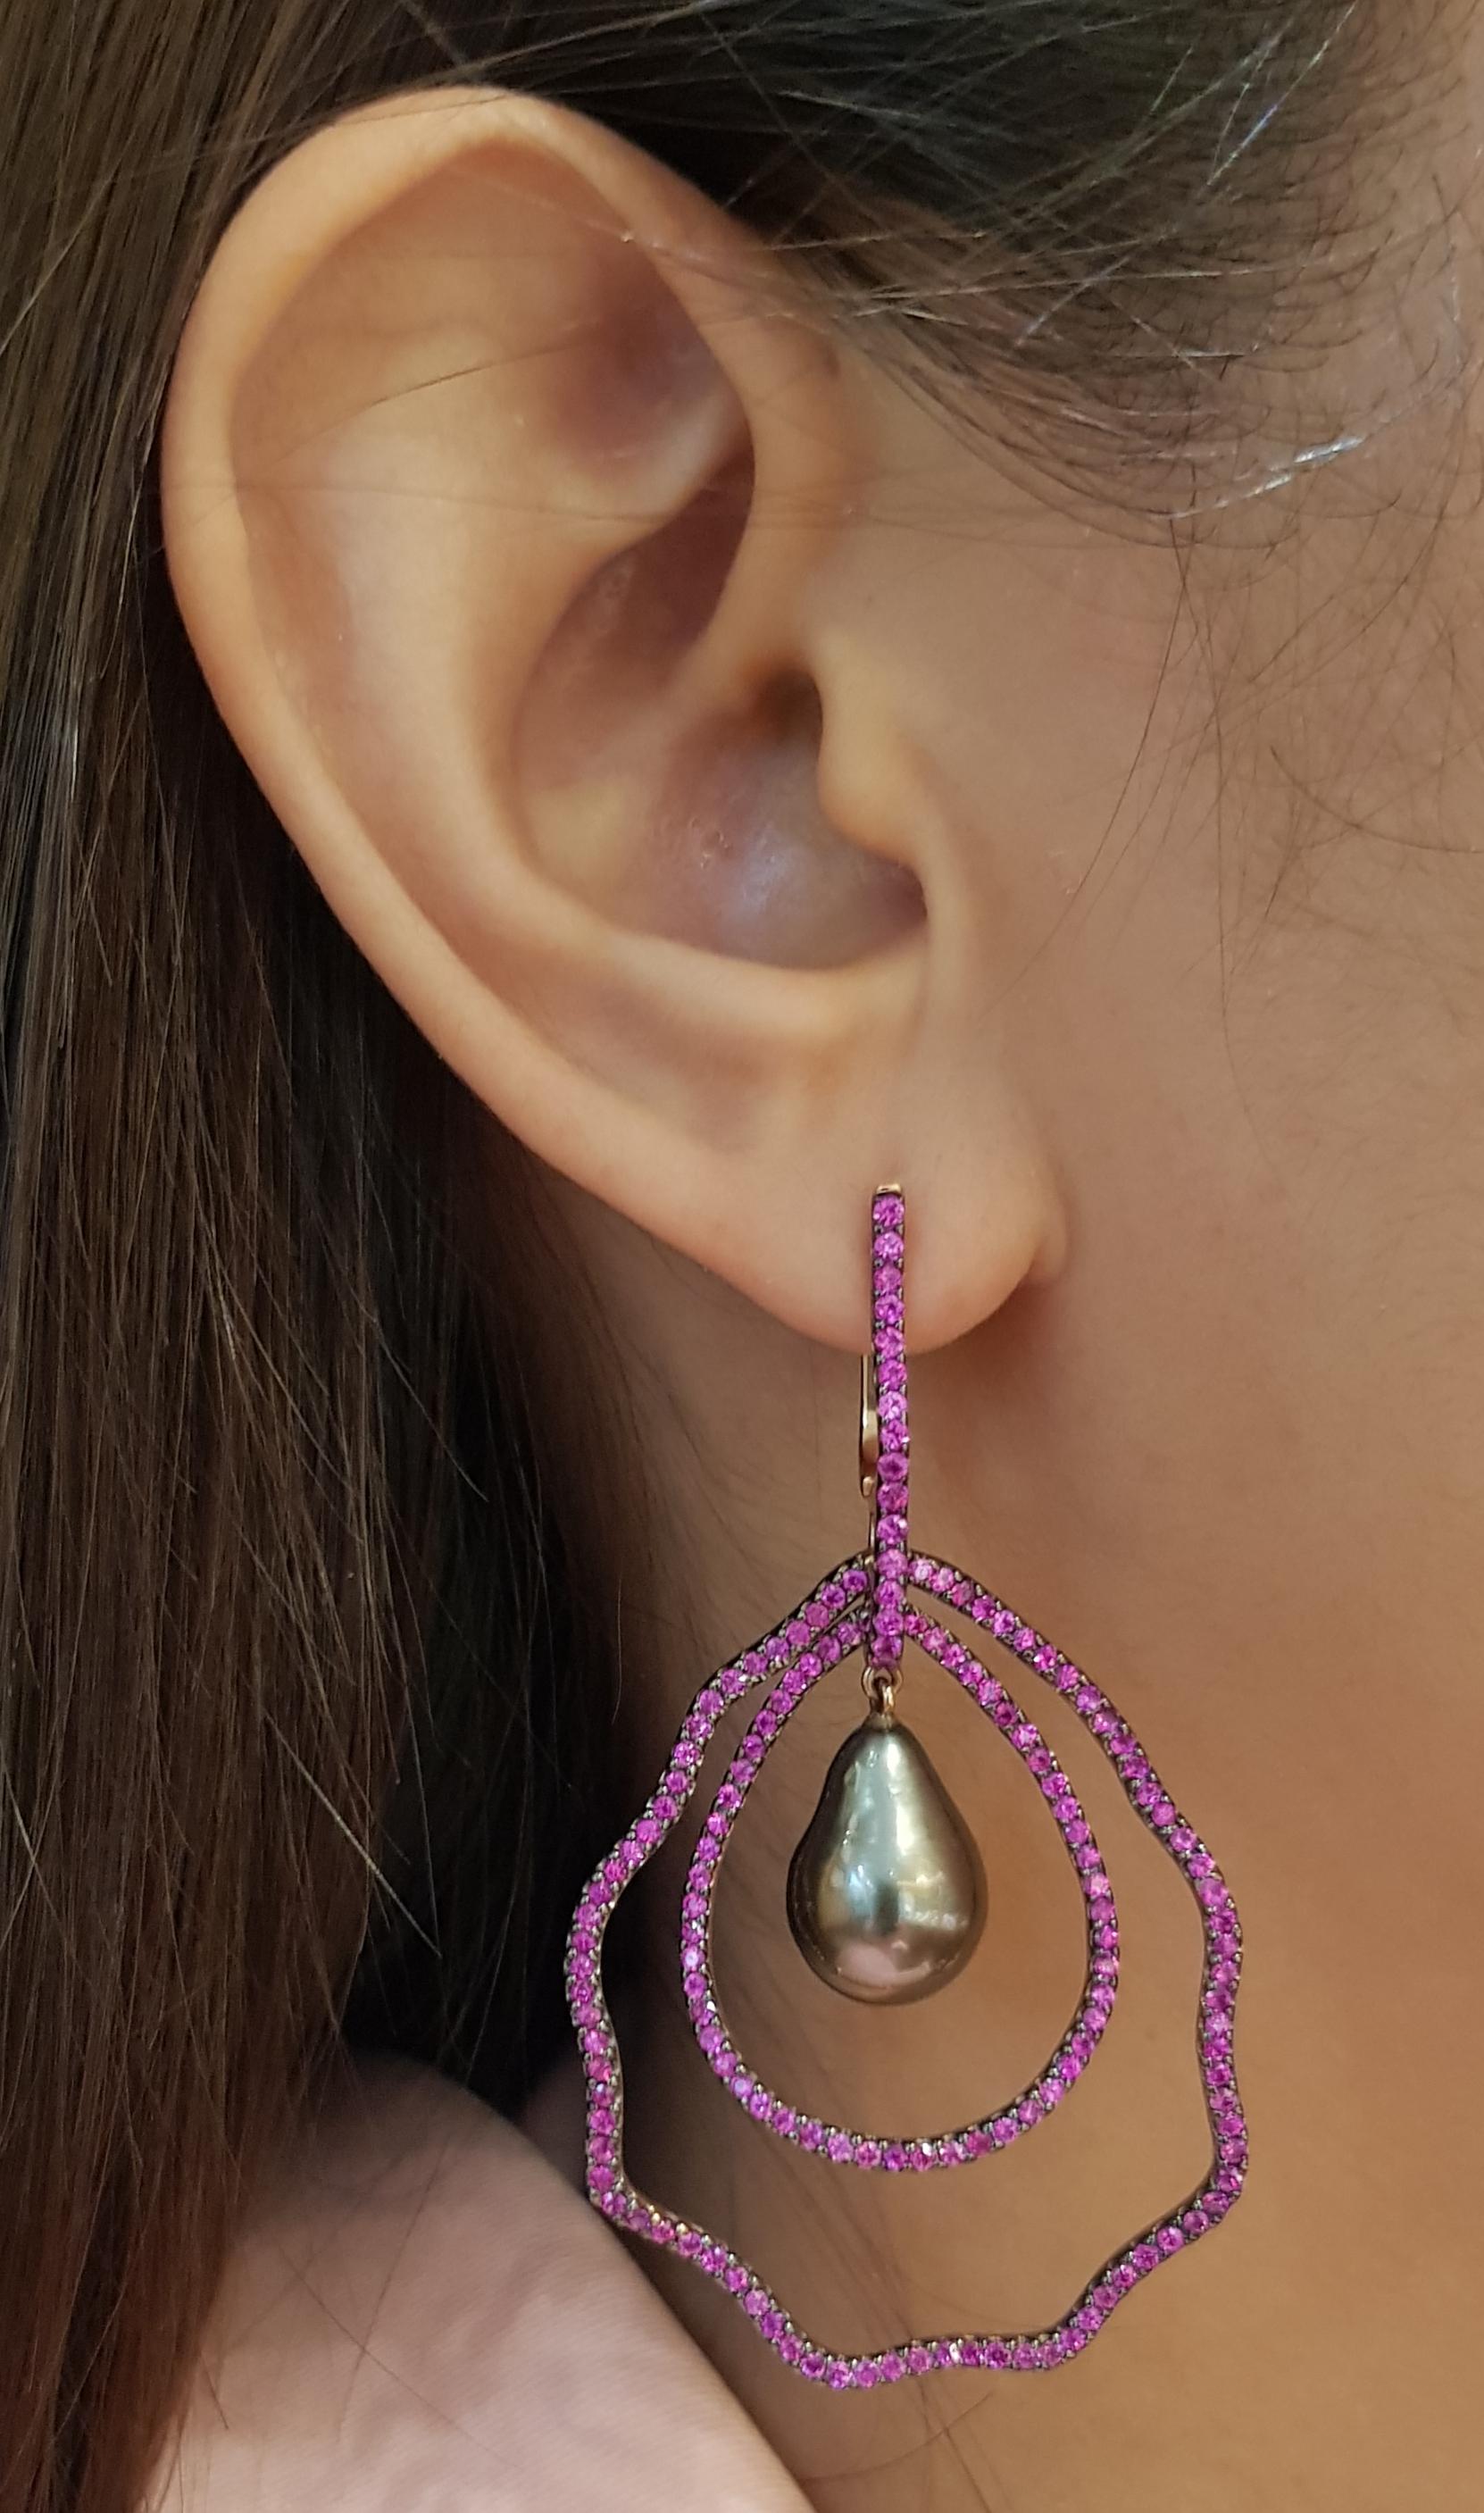 South Sea Pearl with Pink Sapphire 3.48 carats Earrings set in 14 Karat Rose Gold Settings

Width:  3.5 cm 
Length:  5.8 cm
Total Weight: 16.51 grams

South Sea Pearl: 10 mm

